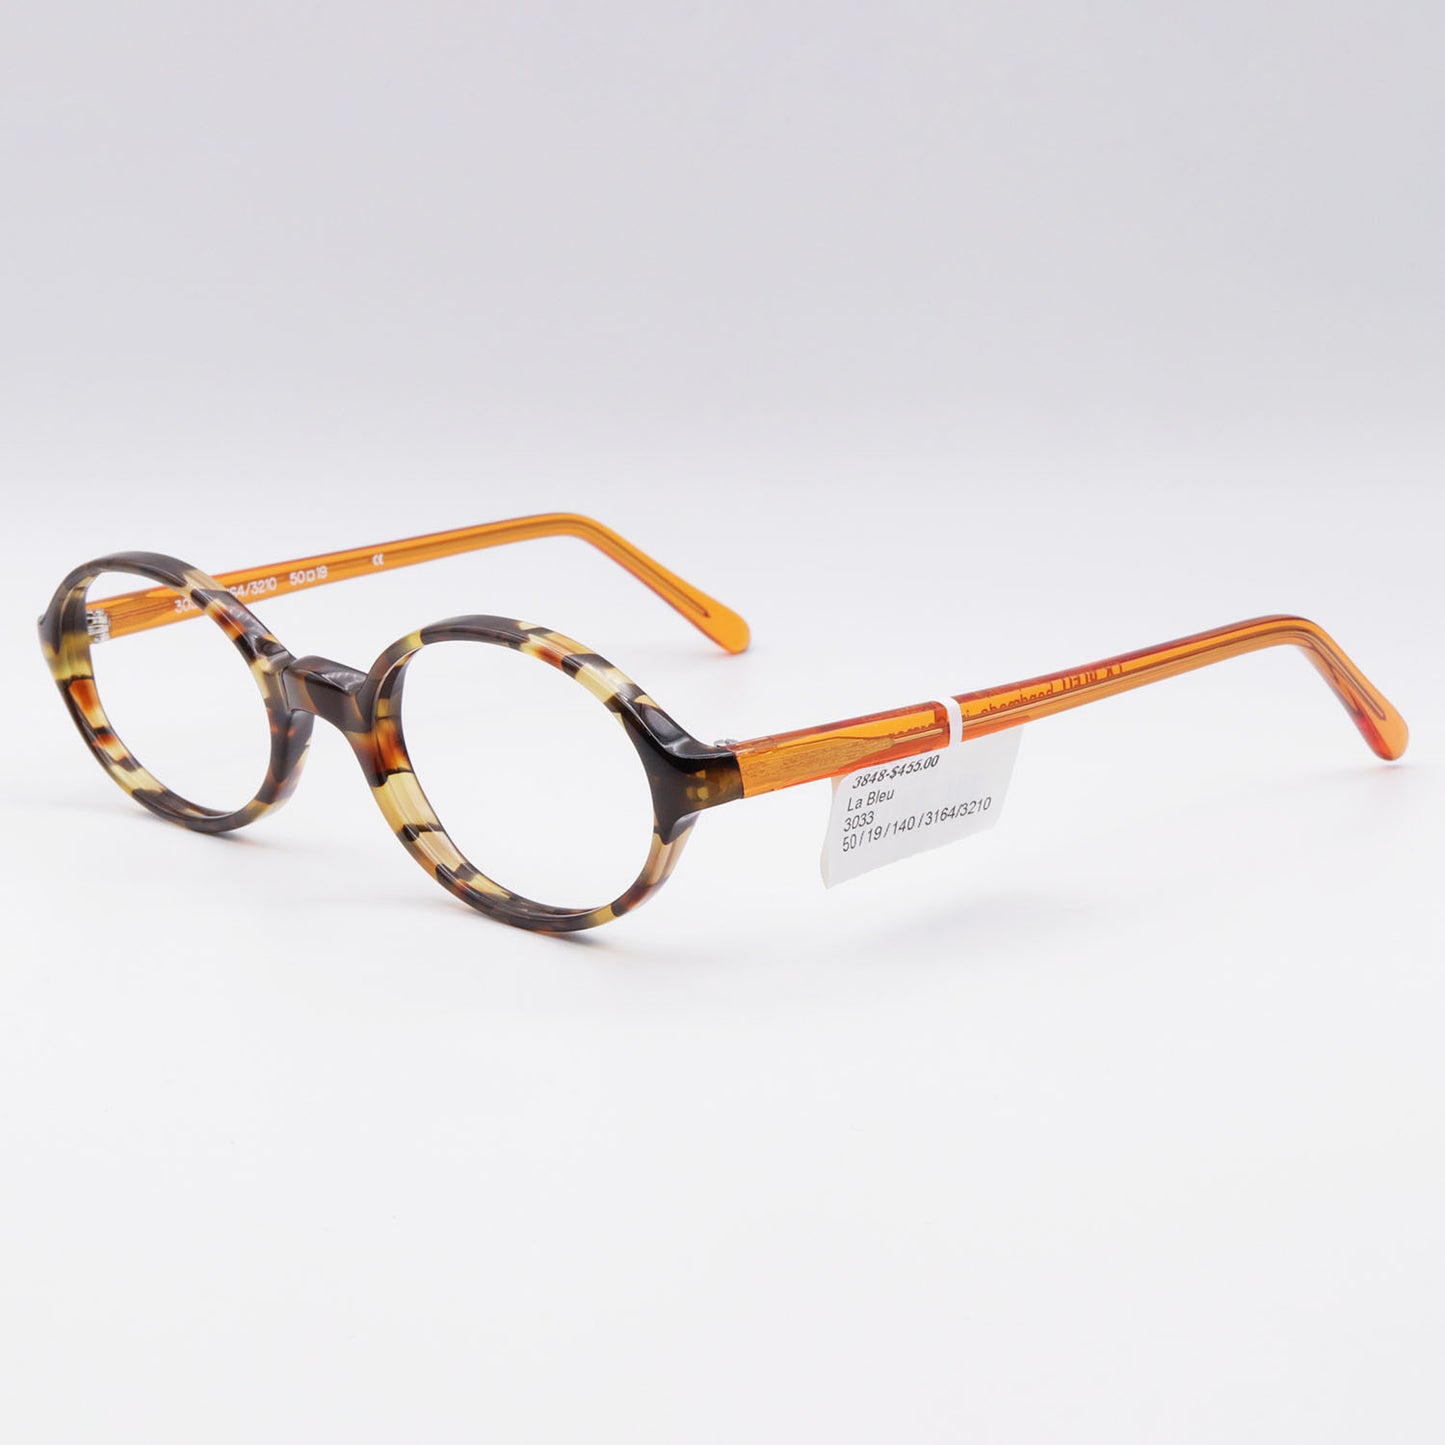 Oval 3033 by La Bleu Brown and Clear